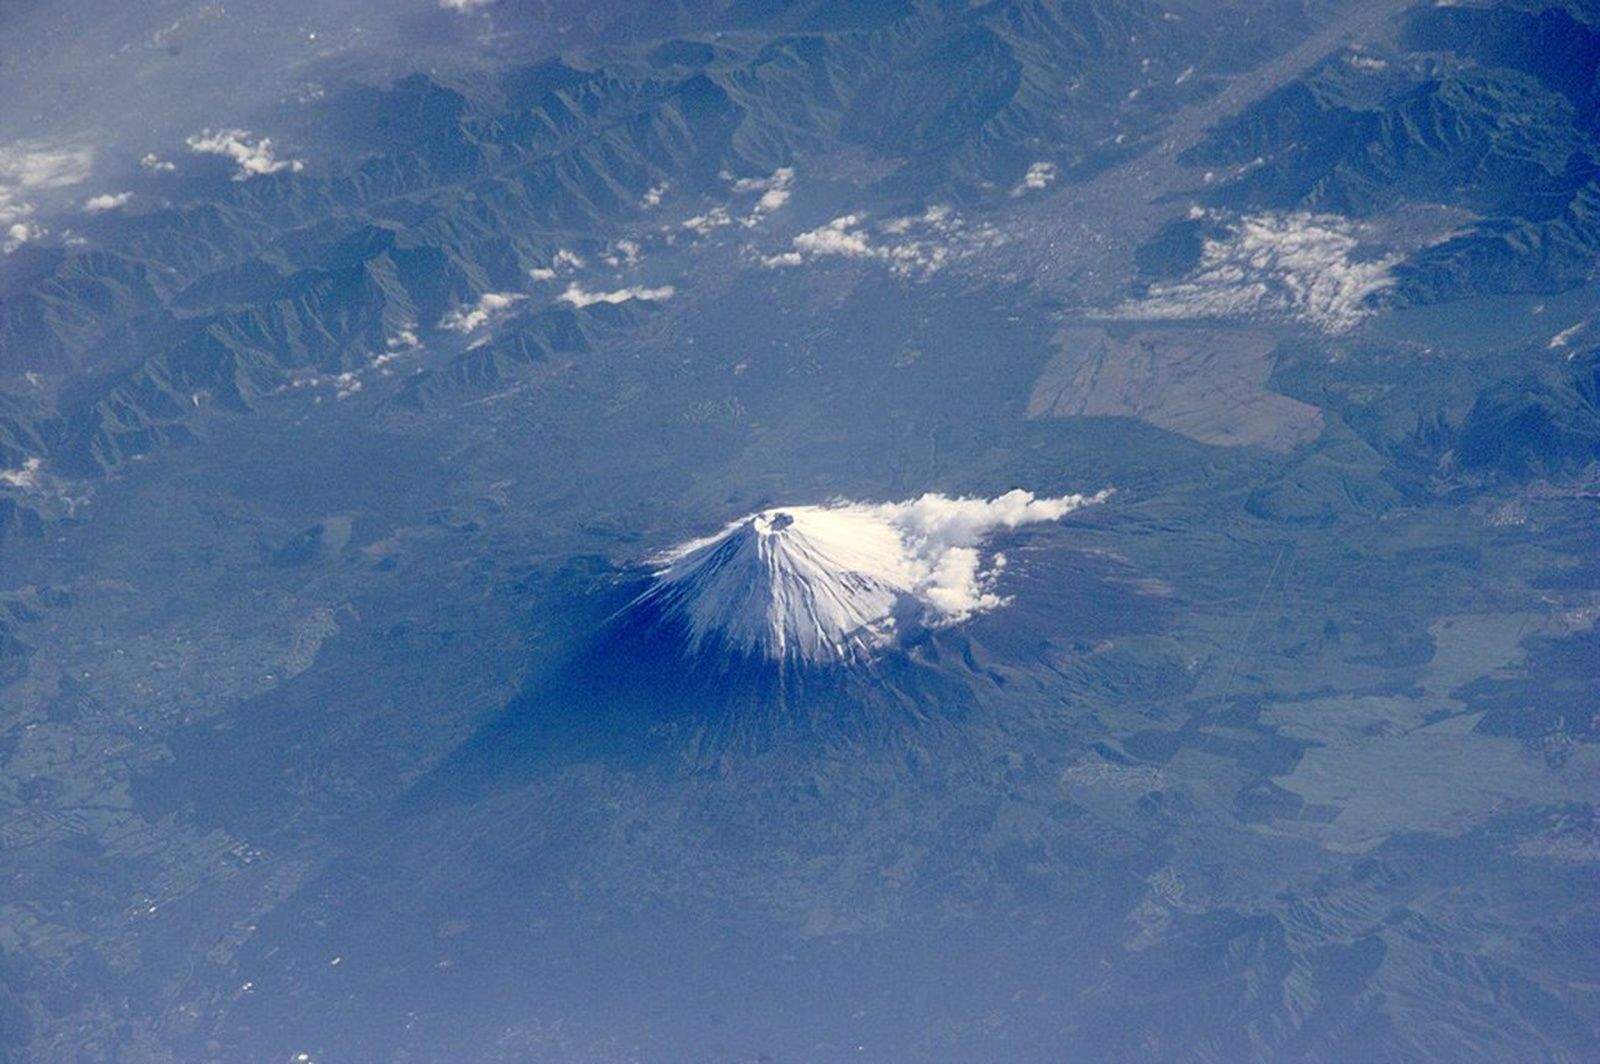 The Japanese government is working to bring Free WiFi to Mount Fuji.